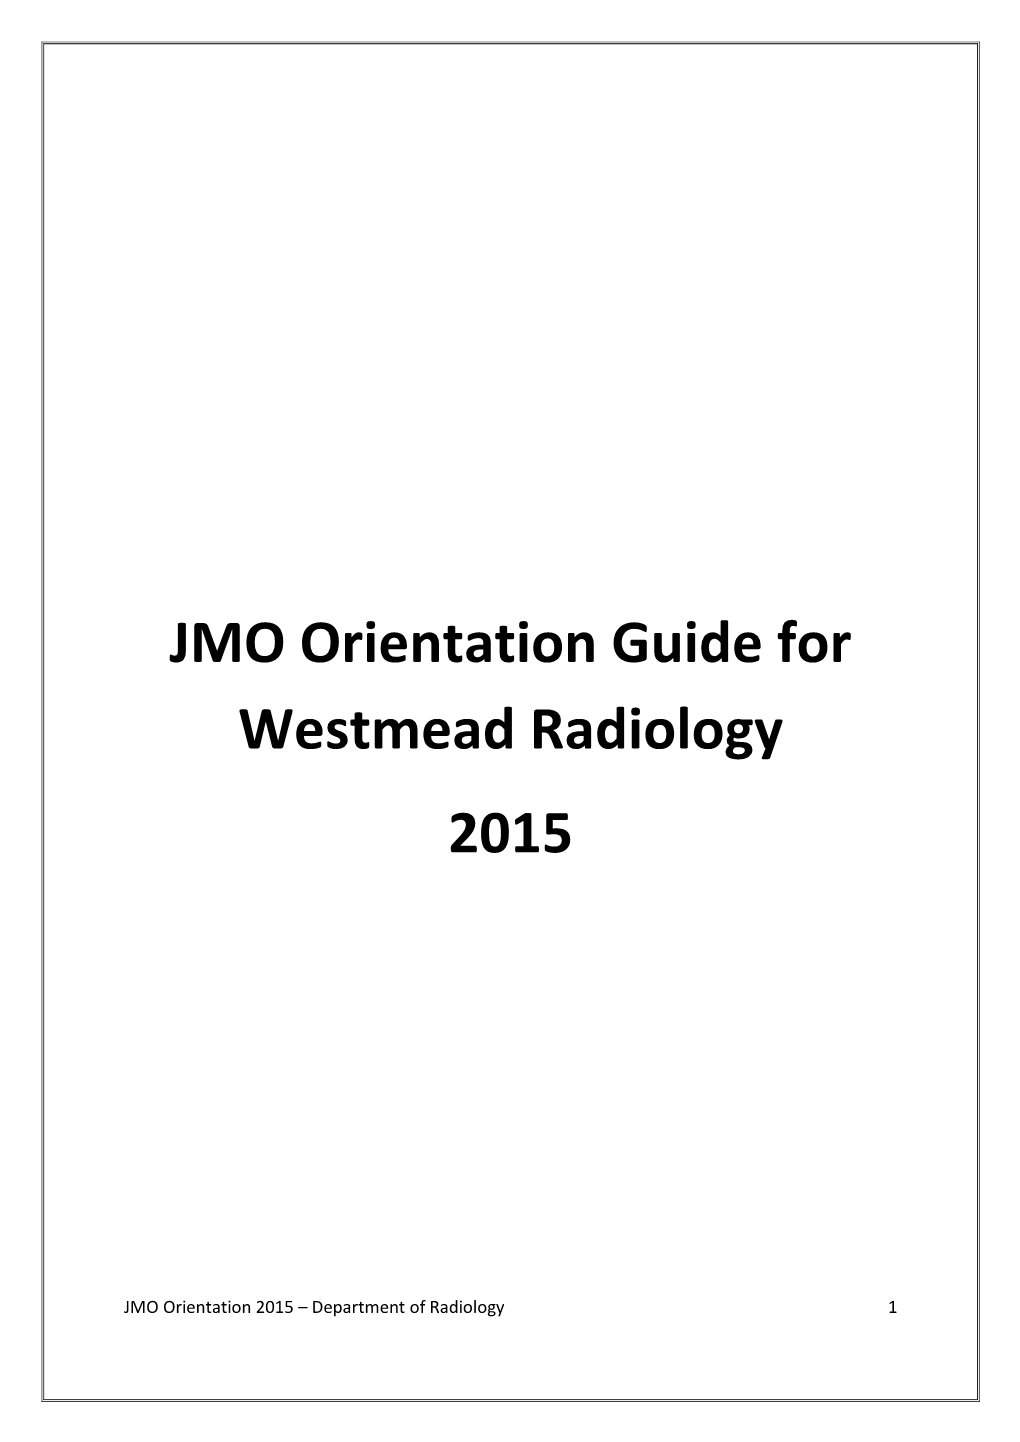 JMO Orientation Guide for Westmead Radiology 2015